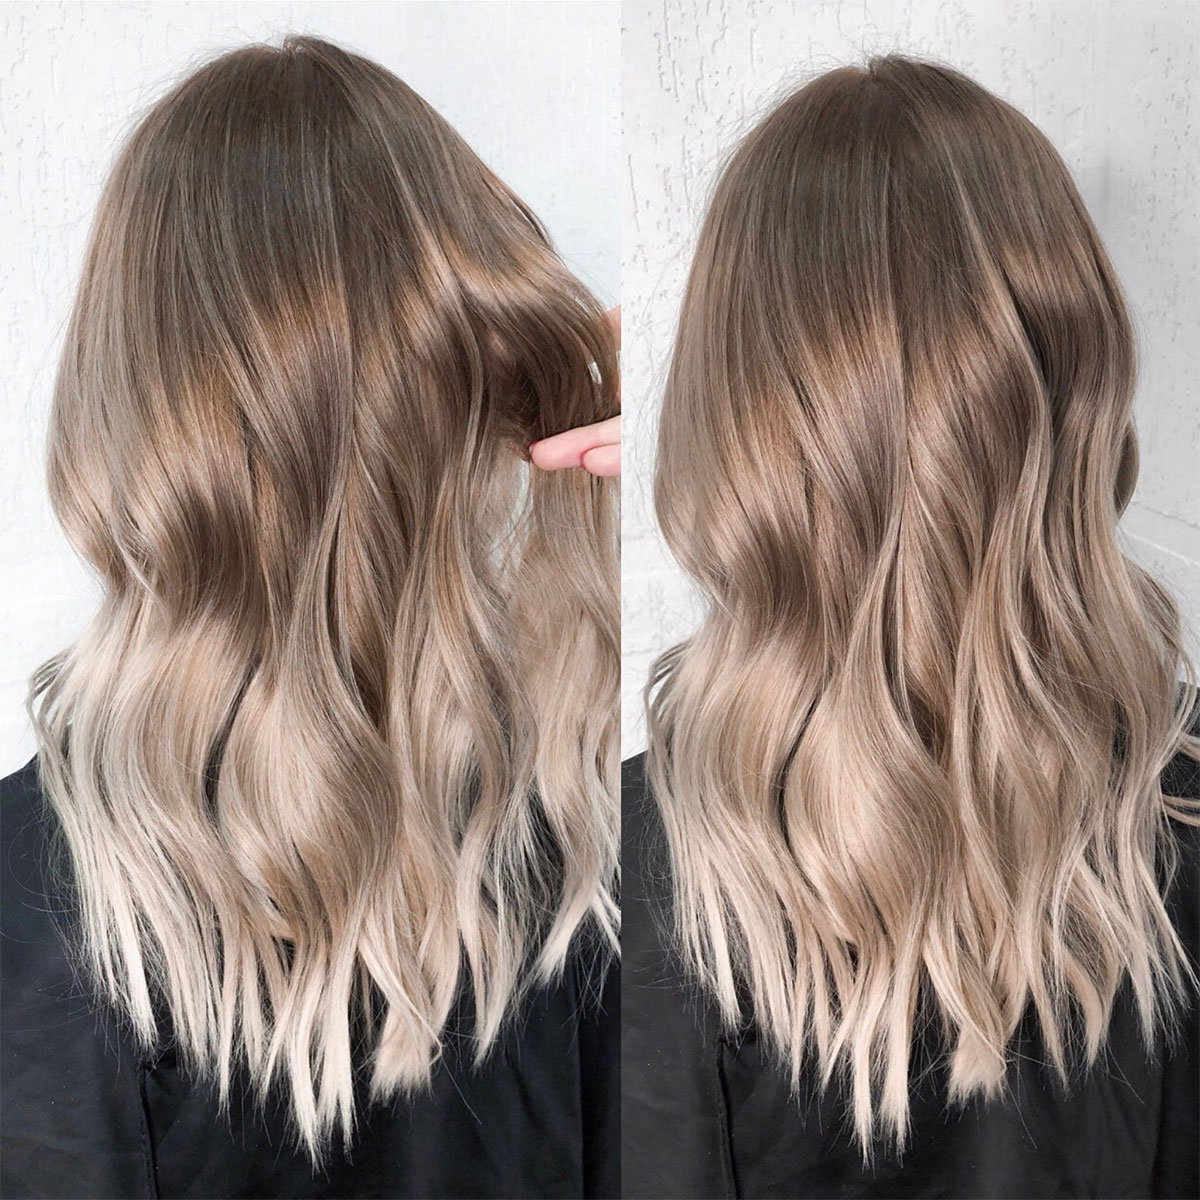 What's The Difference Between Balayage, Ombré, And Sombré Hair Colors? We  Asked Hair Stylists - SHEfinds